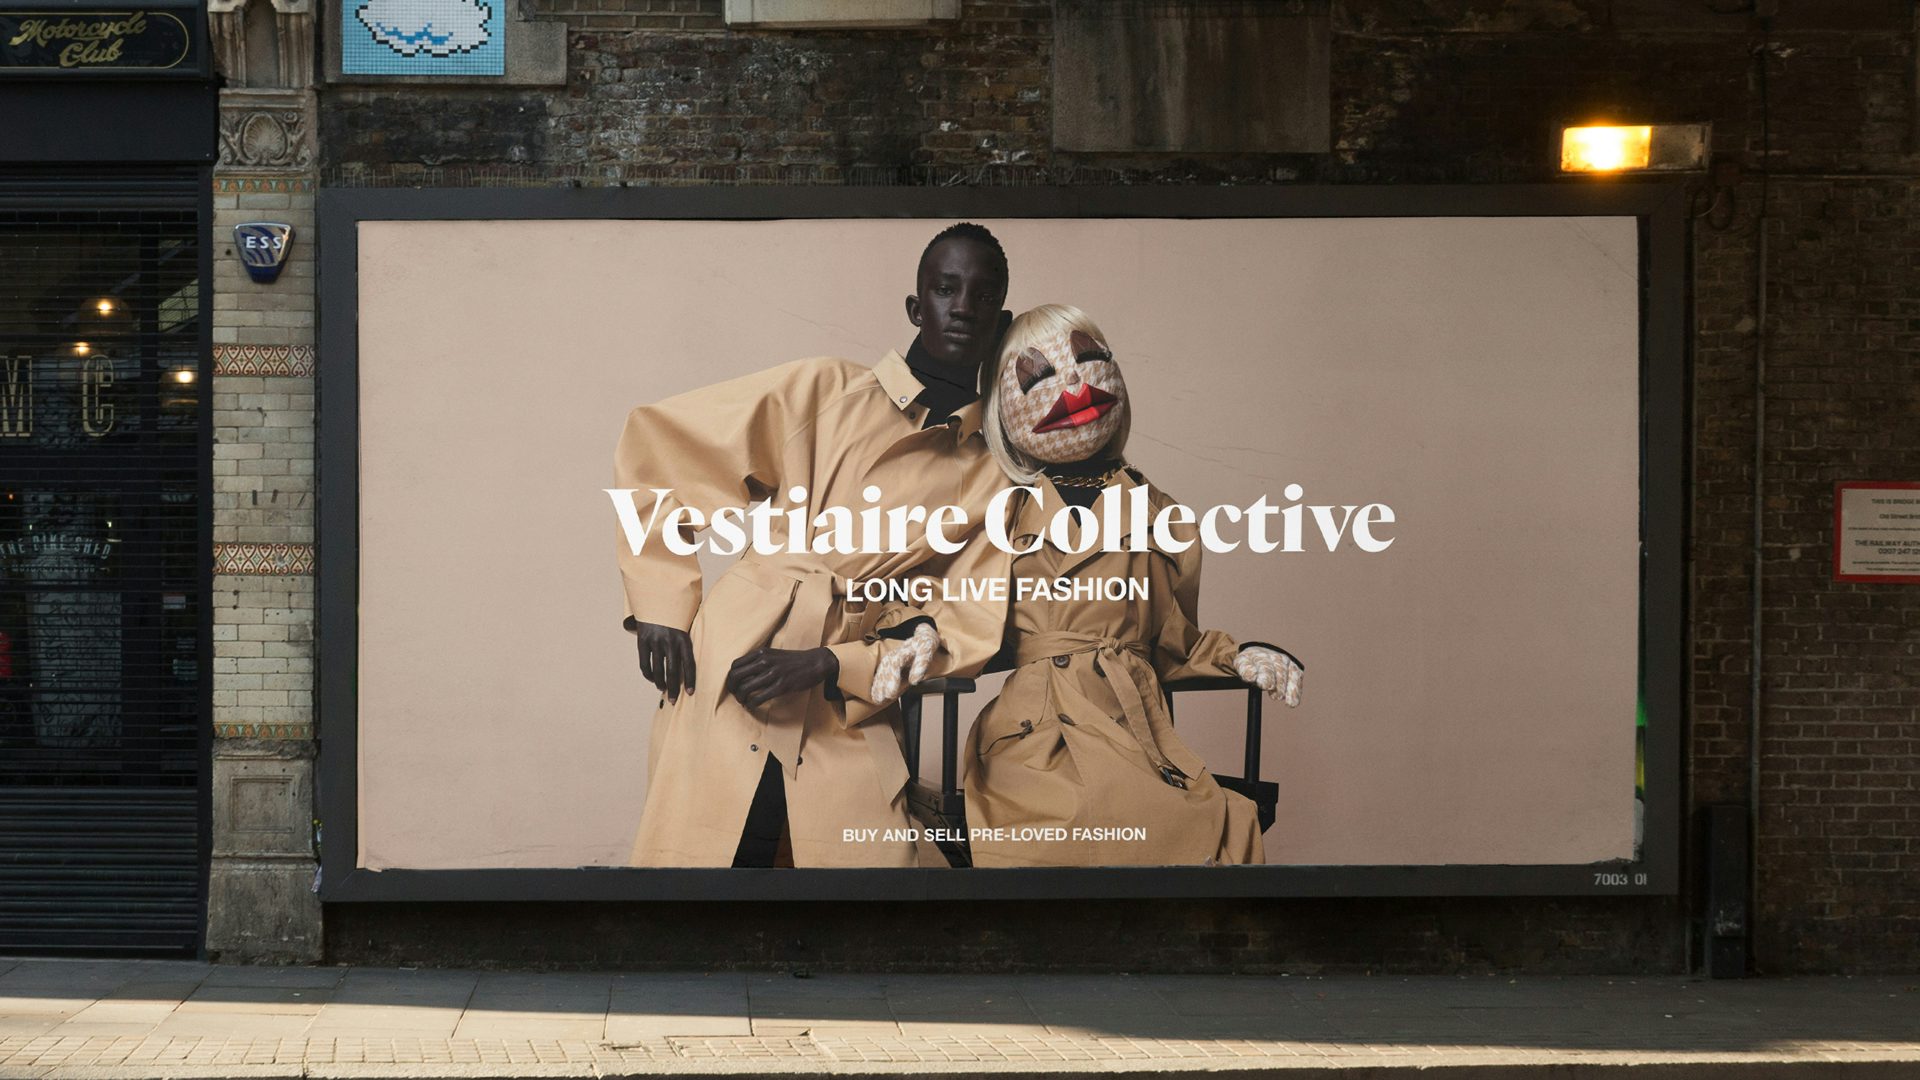 How sustainable is Vestiaire Collective's packaging? – Help Center